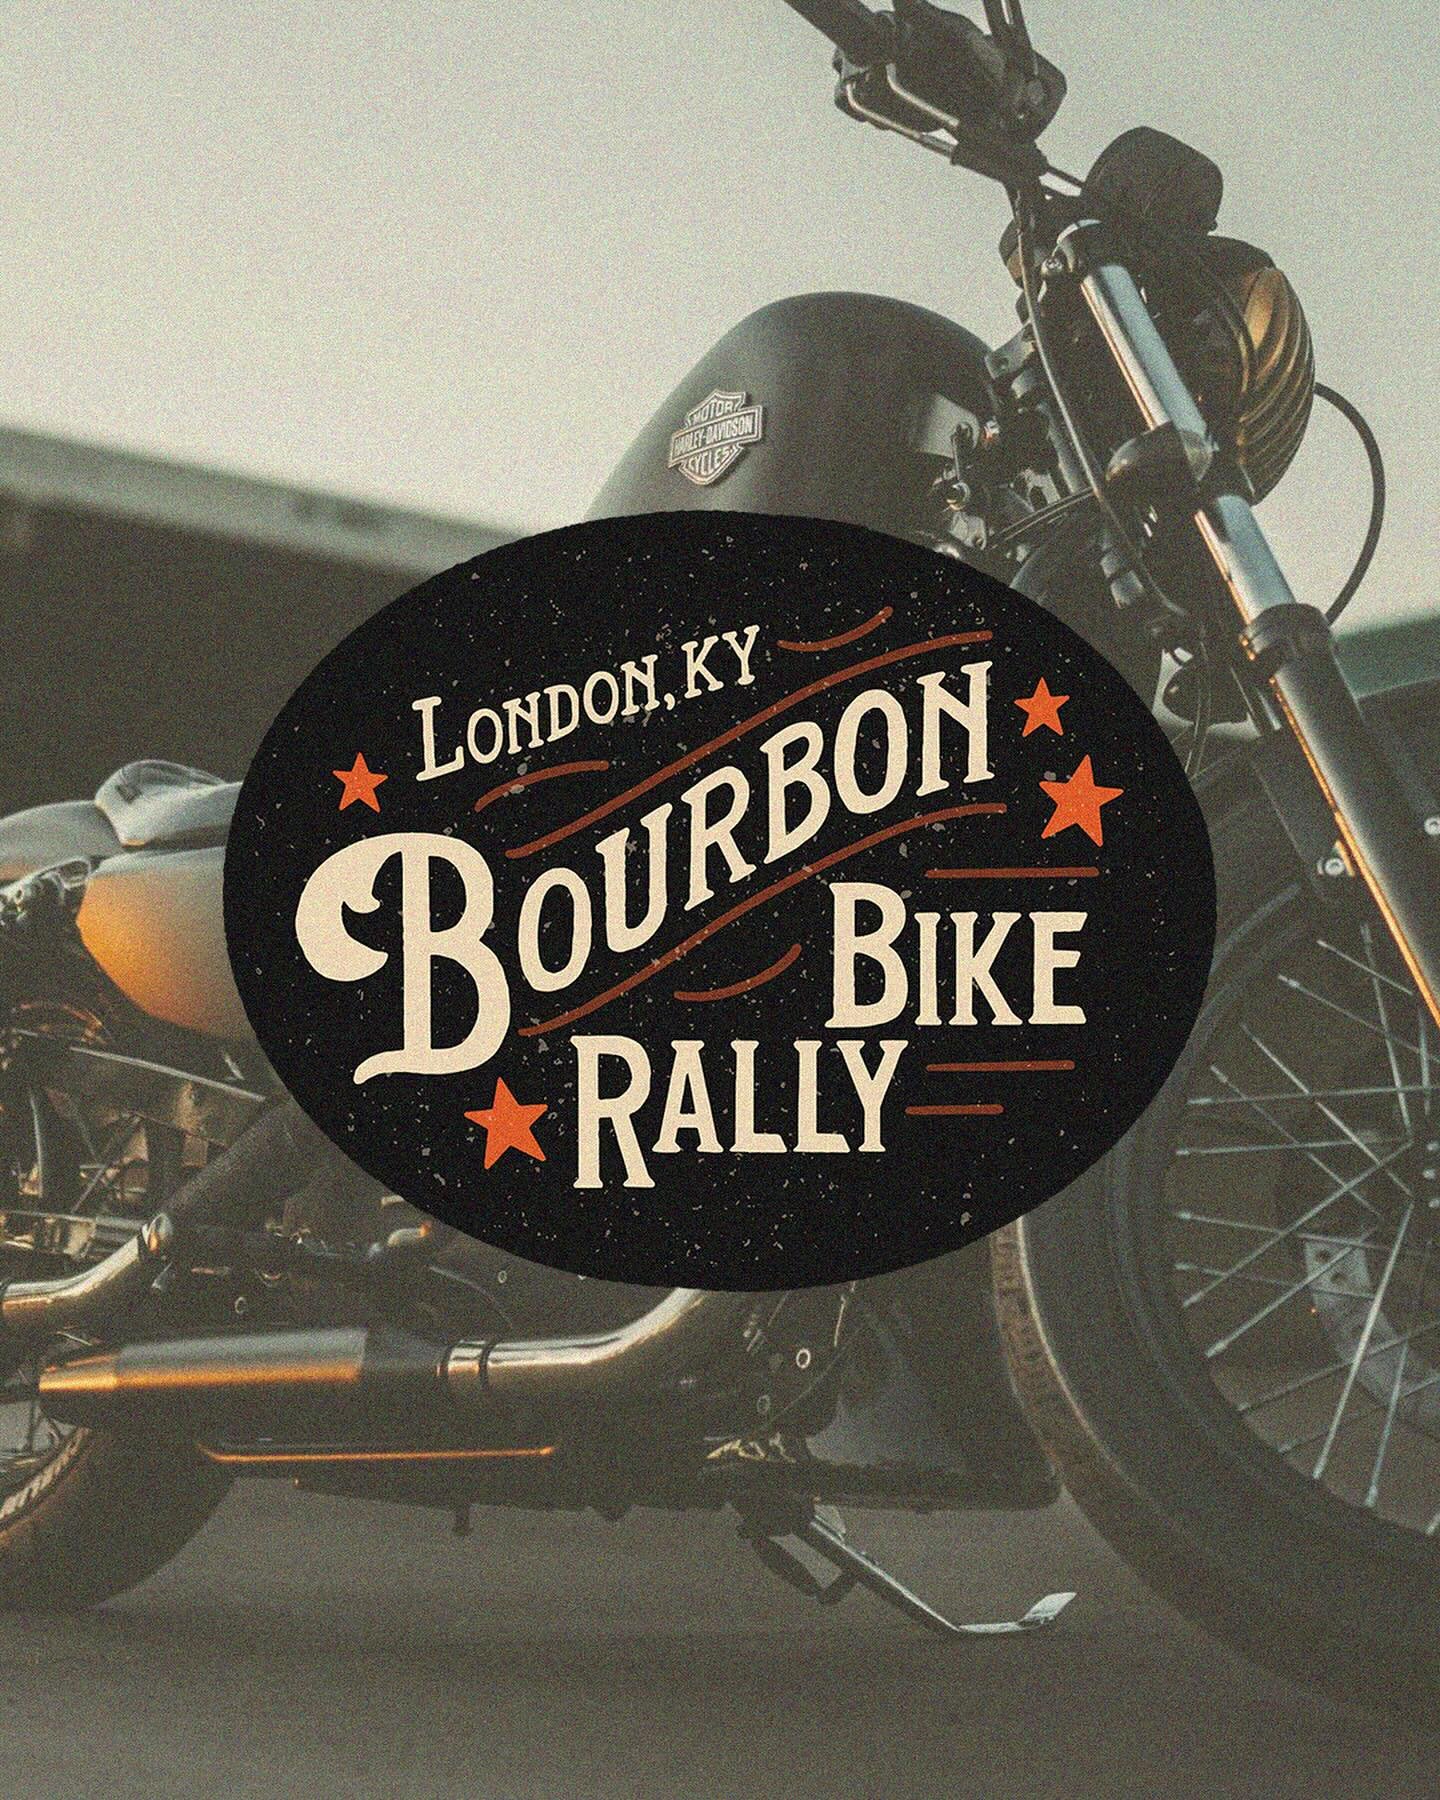 Introducing the bold new logo for Harley-Davidson&rsquo;s Bike Rally in London, Kentucky 🏍 When crafting the logo options, we aimed to embody the essence of Bourbon country. Our designs echo the rich hues of bourbon, reflect the charm of original ha